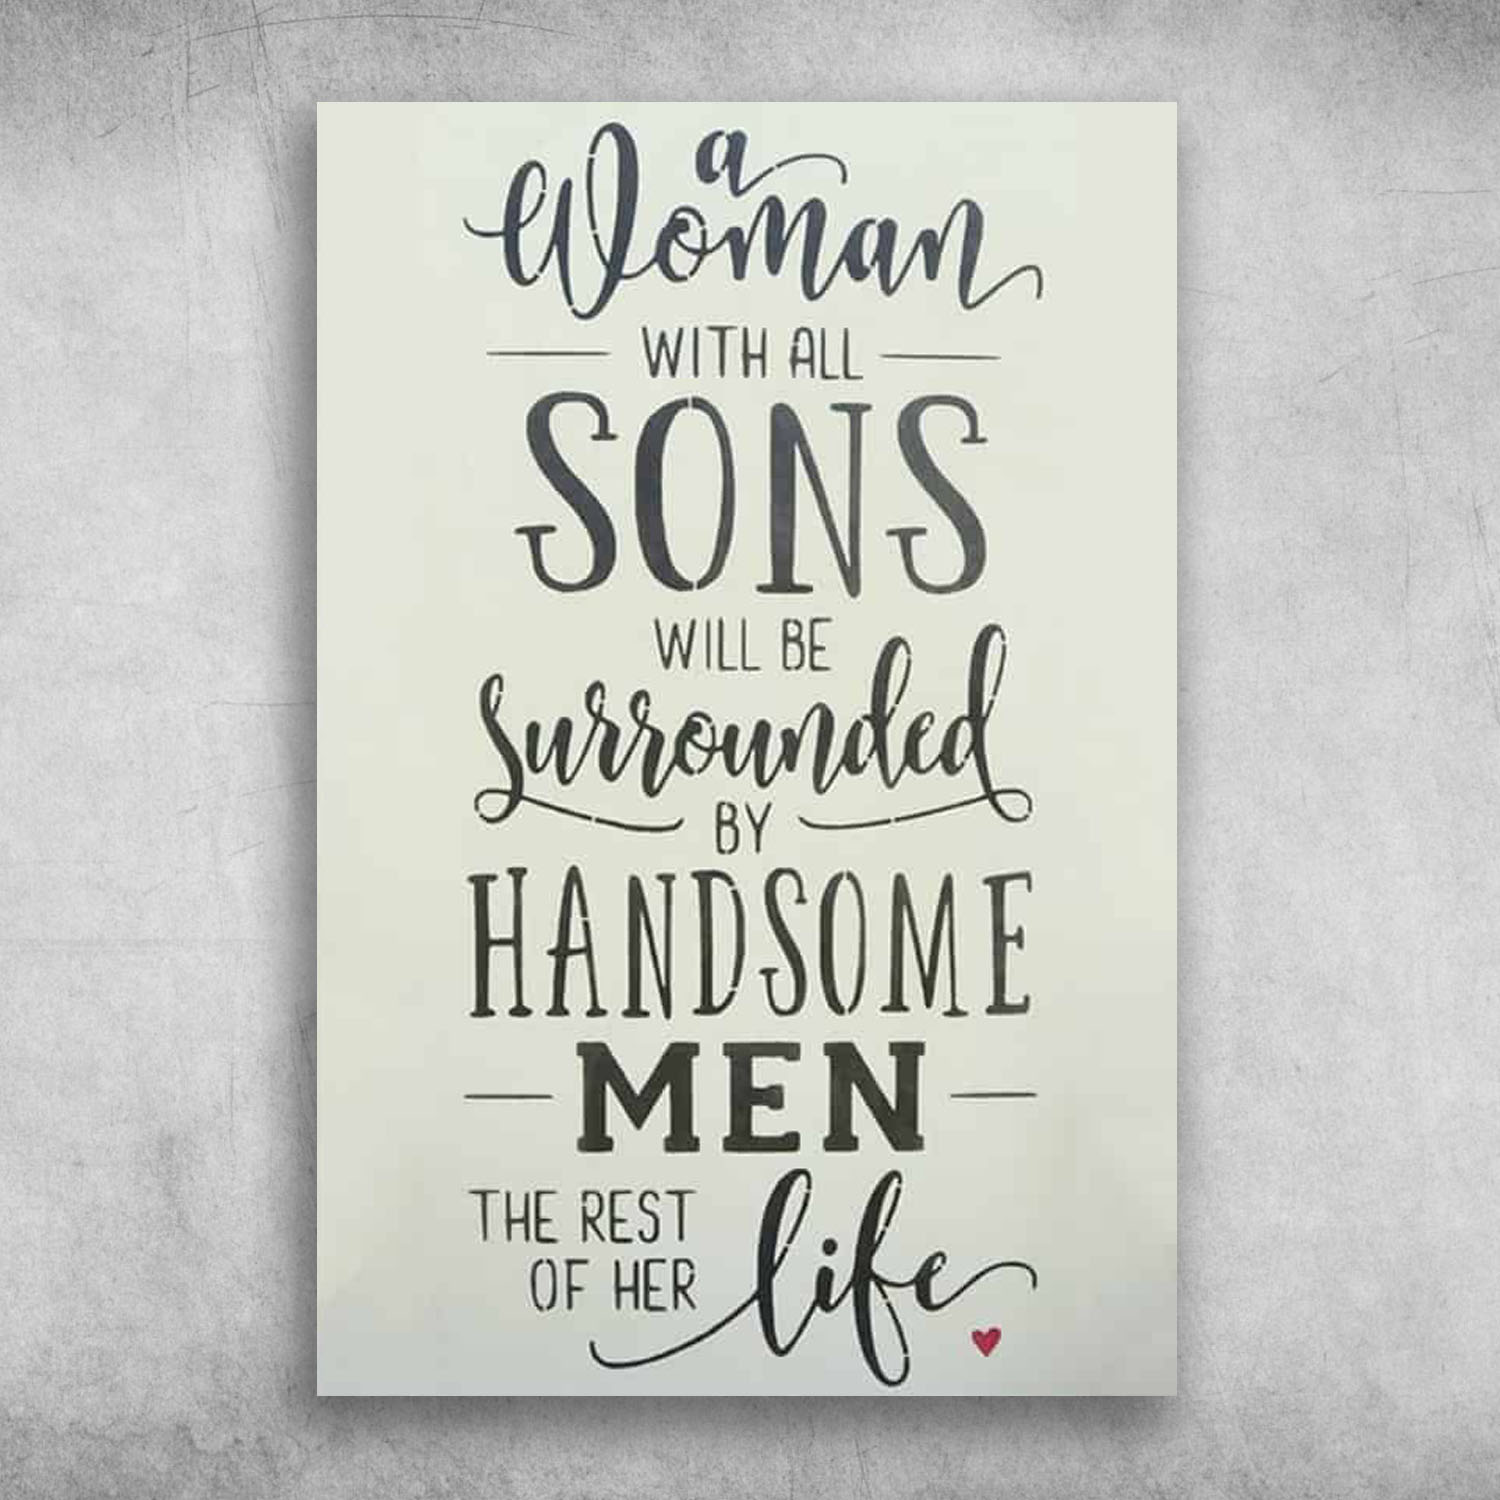 A Woman With All Sons Will Be Surrounded By Handsome Men